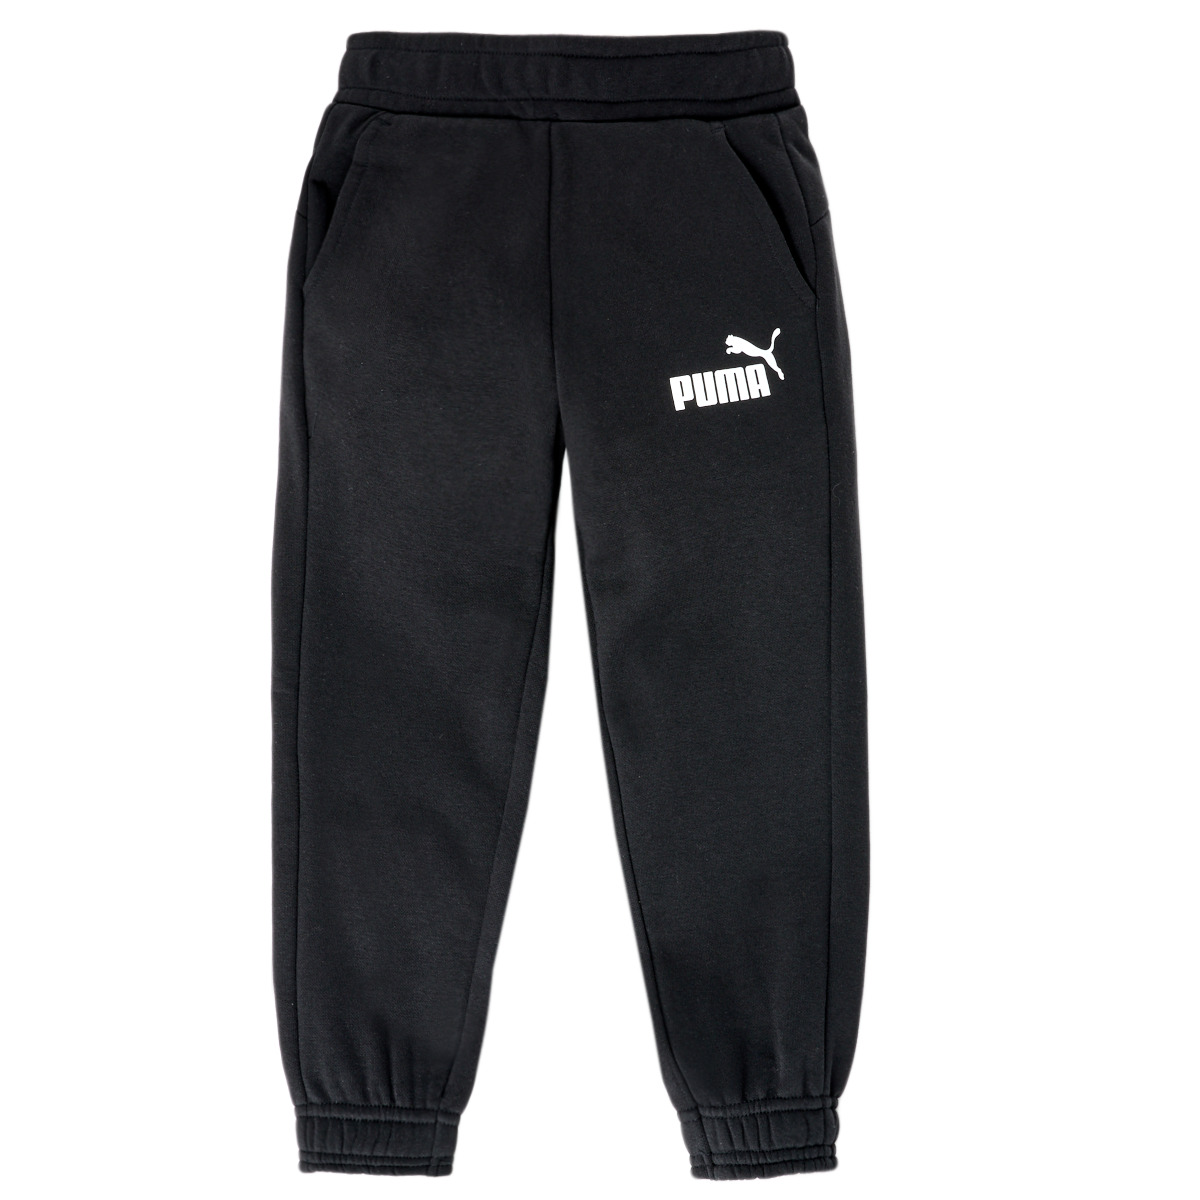 Puma SWEAT PANT Black - Fast delivery 